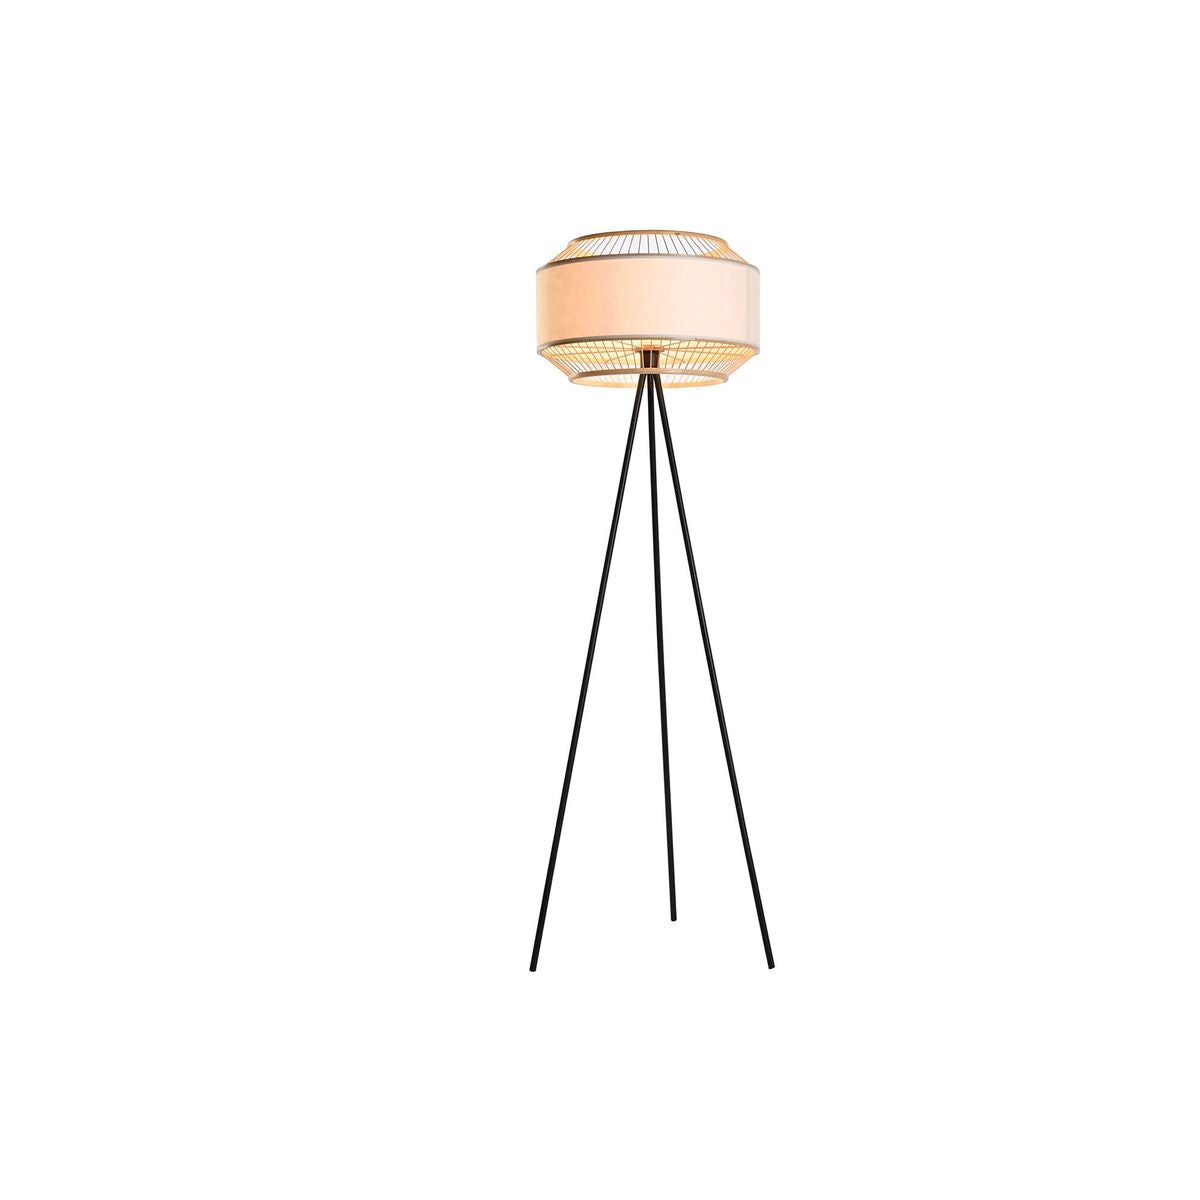 White Floor Lamp in Bamboo with Black Metal Finish 50 W (50 x 50 x 163 cm)